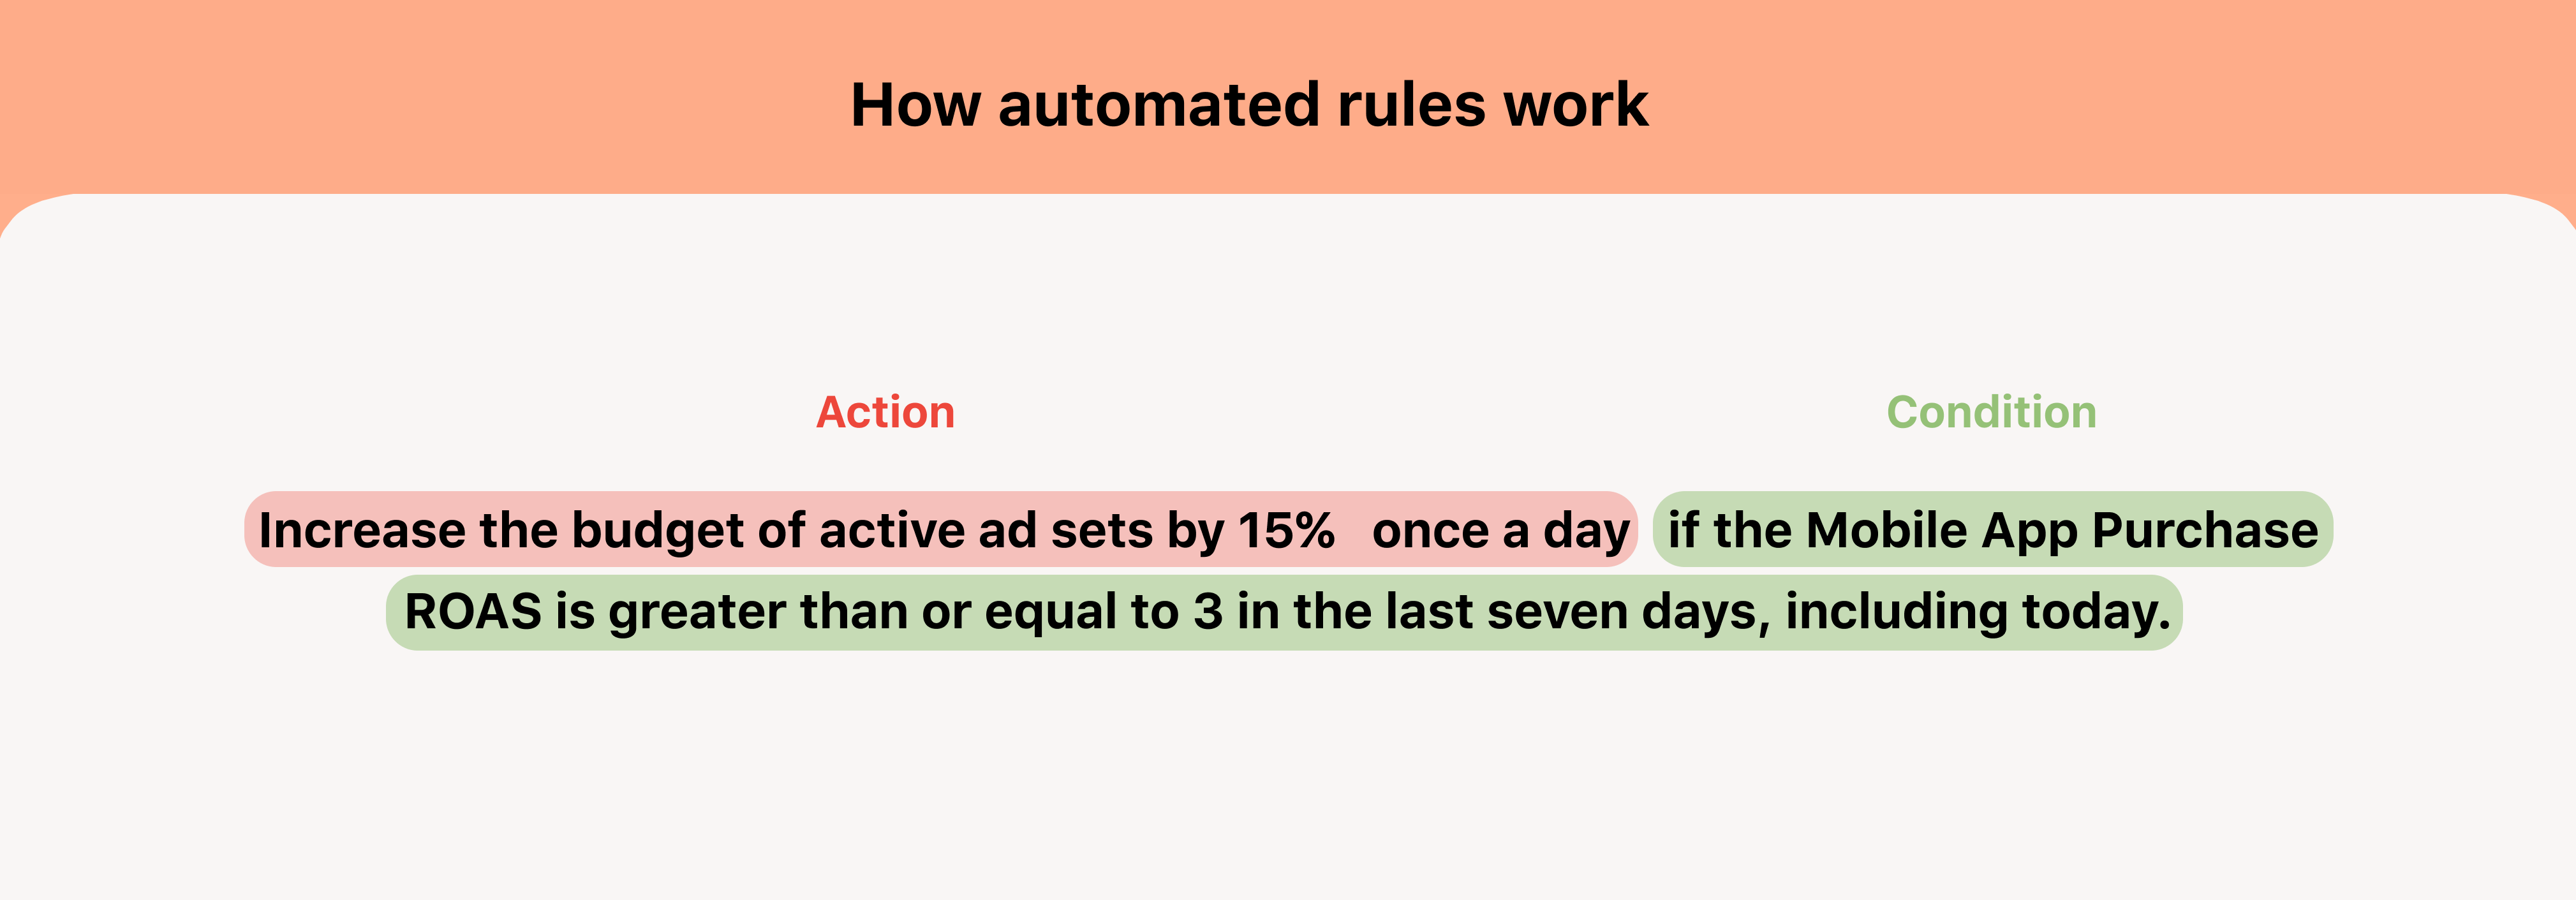 how automated ruled work